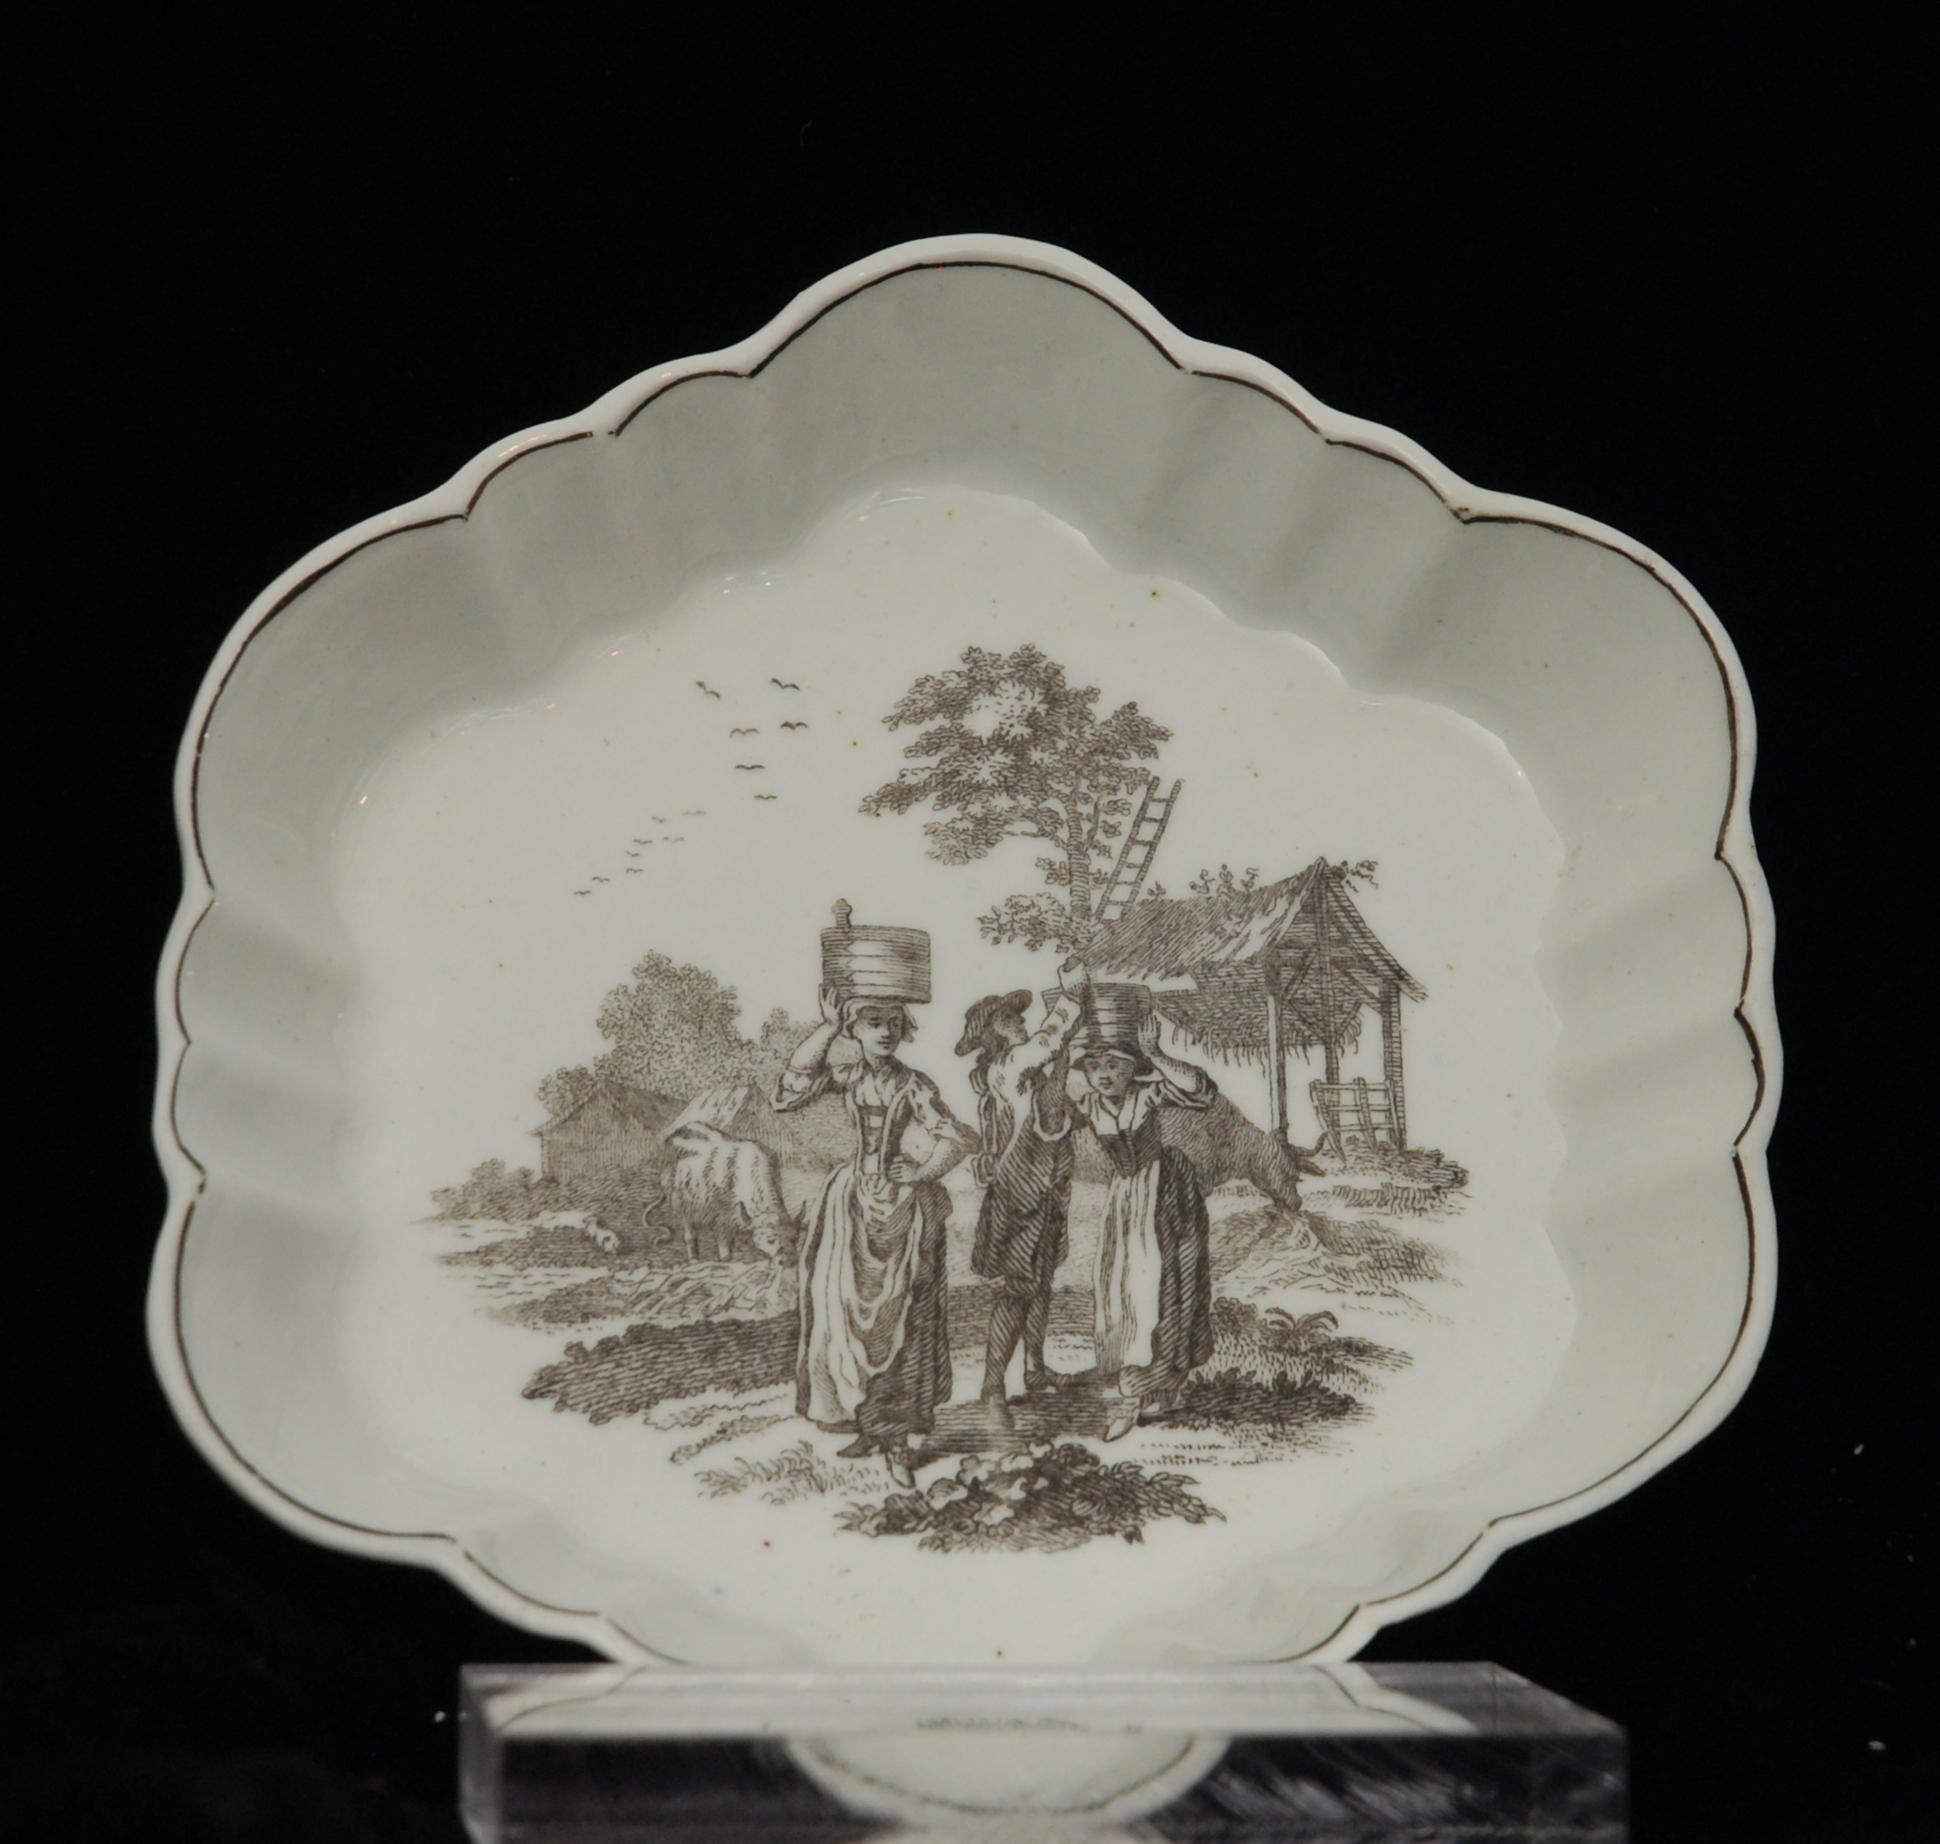 Hexagonal teapot stand, with transfer print decoration of The Milkmaids.

From an engraving by Richard Hancock, one the best and most important of the engravers of this period. This attribution on the basis of other examples bearing his monogram.
